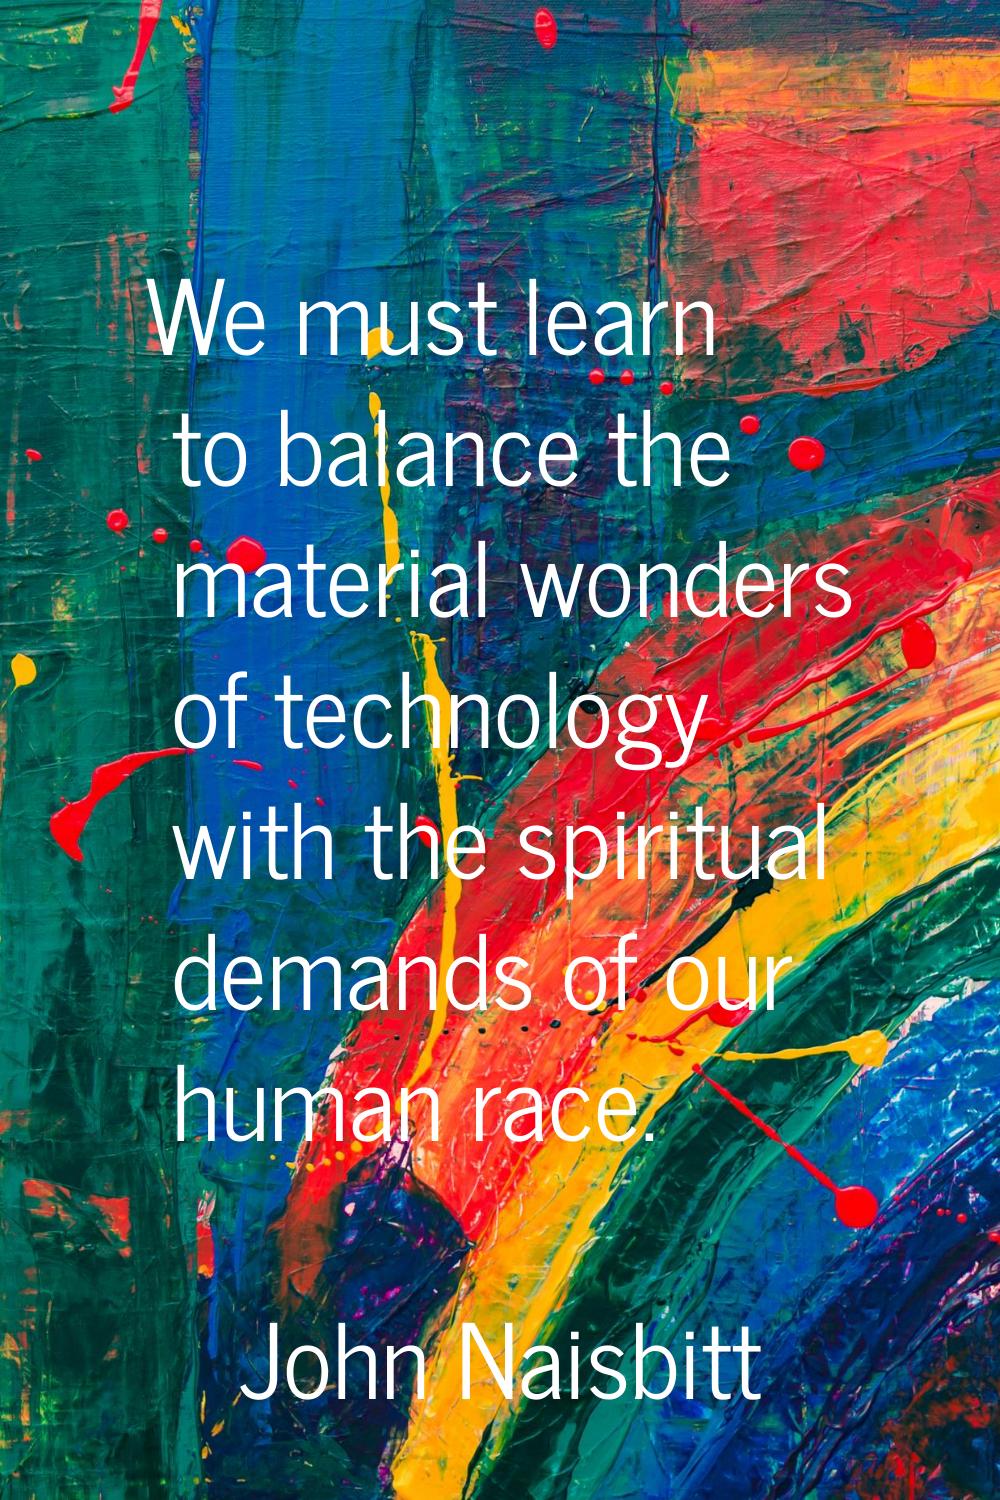 We must learn to balance the material wonders of technology with the spiritual demands of our human